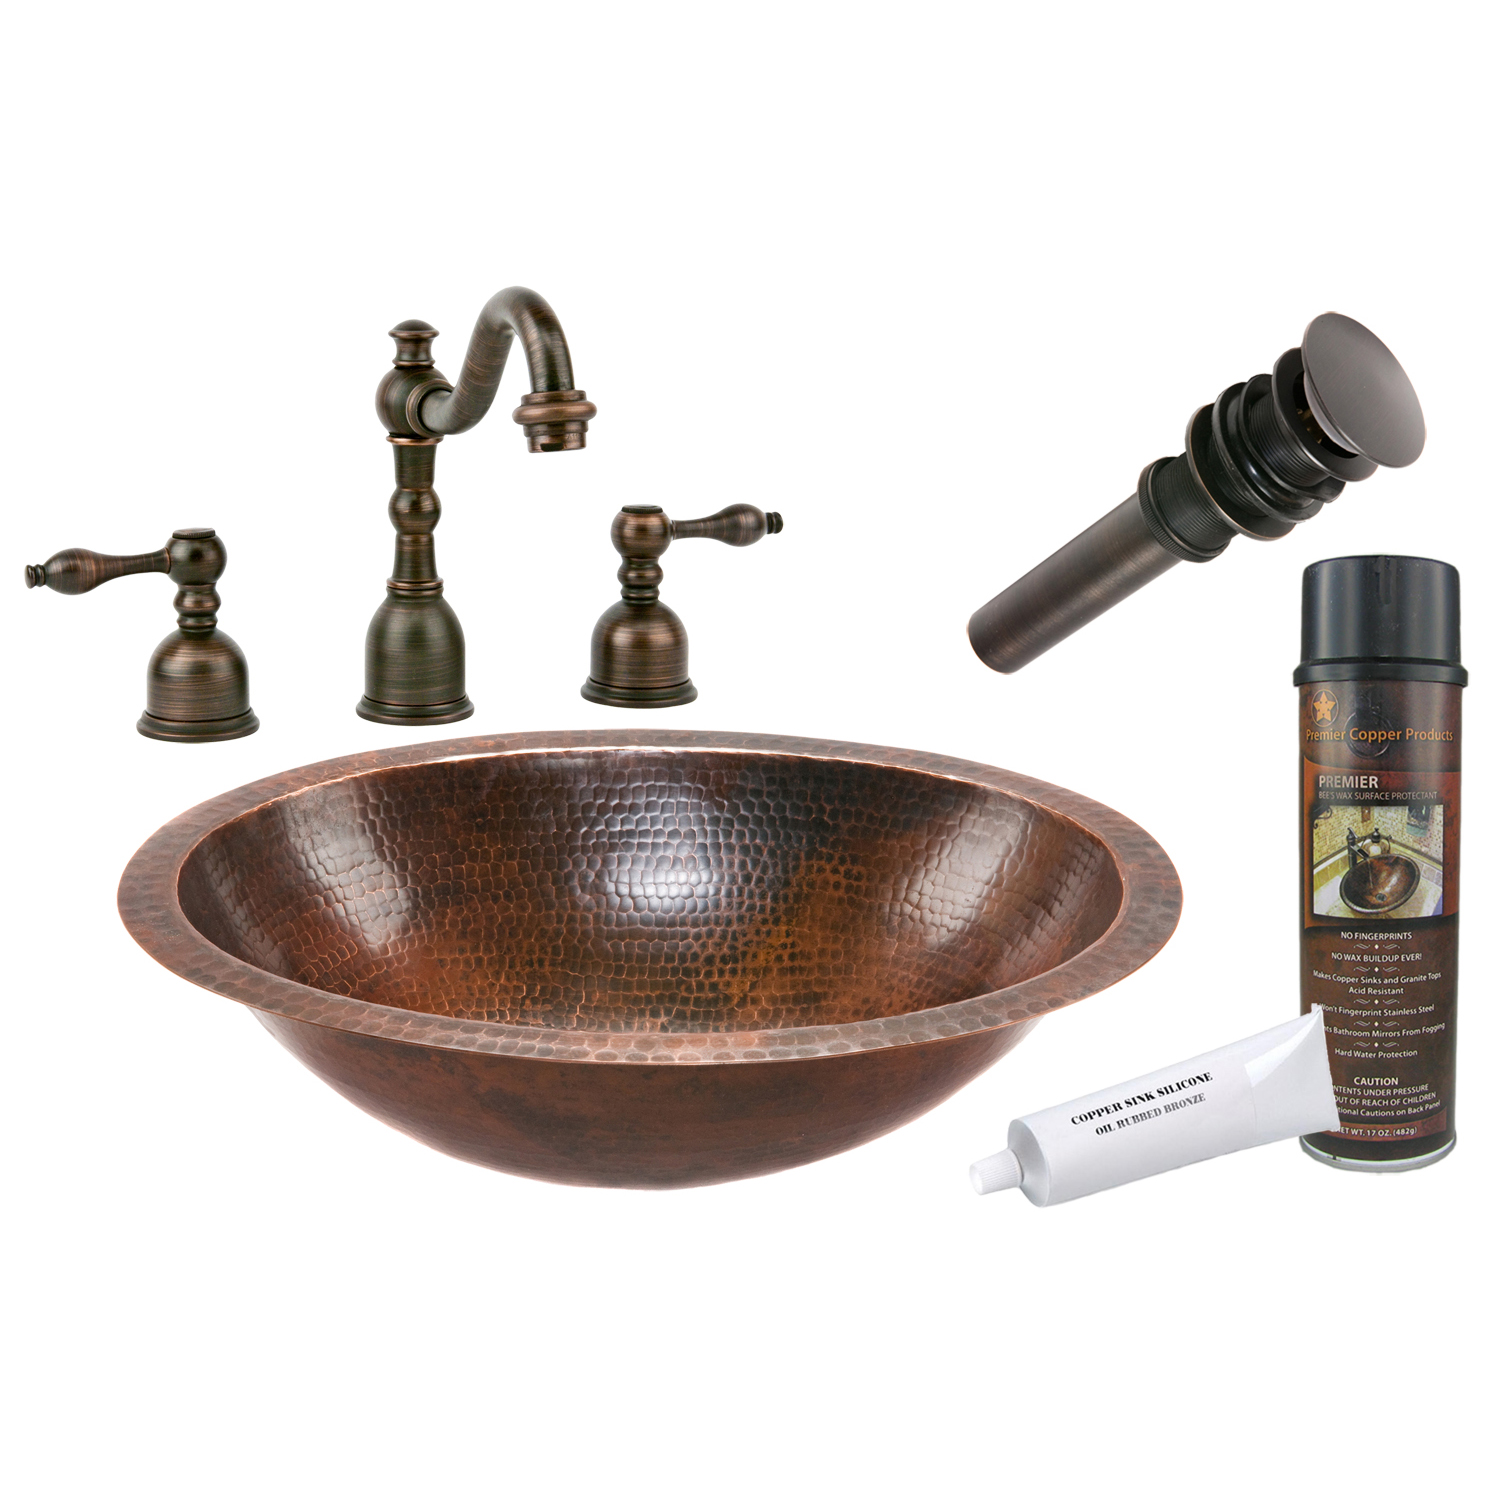 Oval Under Counter Hammered Copper Bathroom Sink, Faucet And Accessories Package, Oil Rubbed Bronze